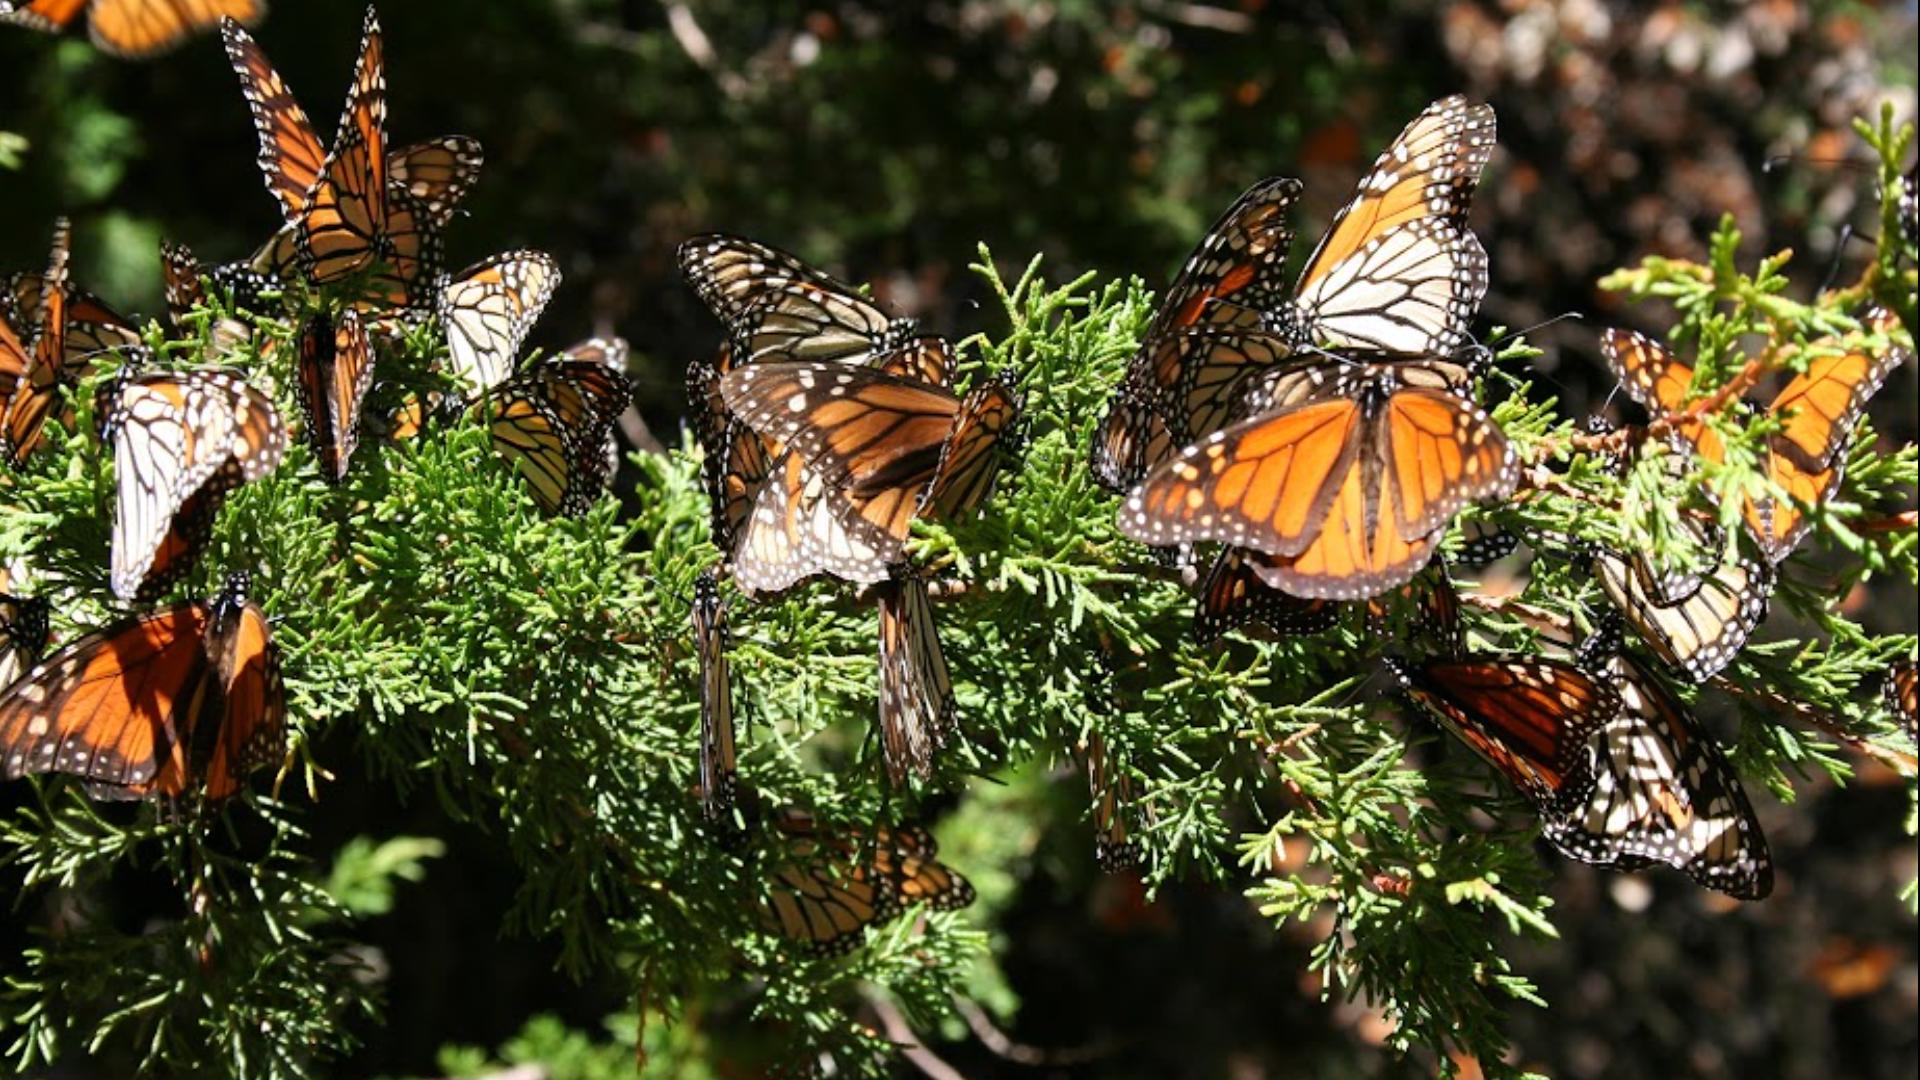 An alarming drop in the butterfly population could impact everyone across the Peach State. Here's what you need to know about the decline and how to help.